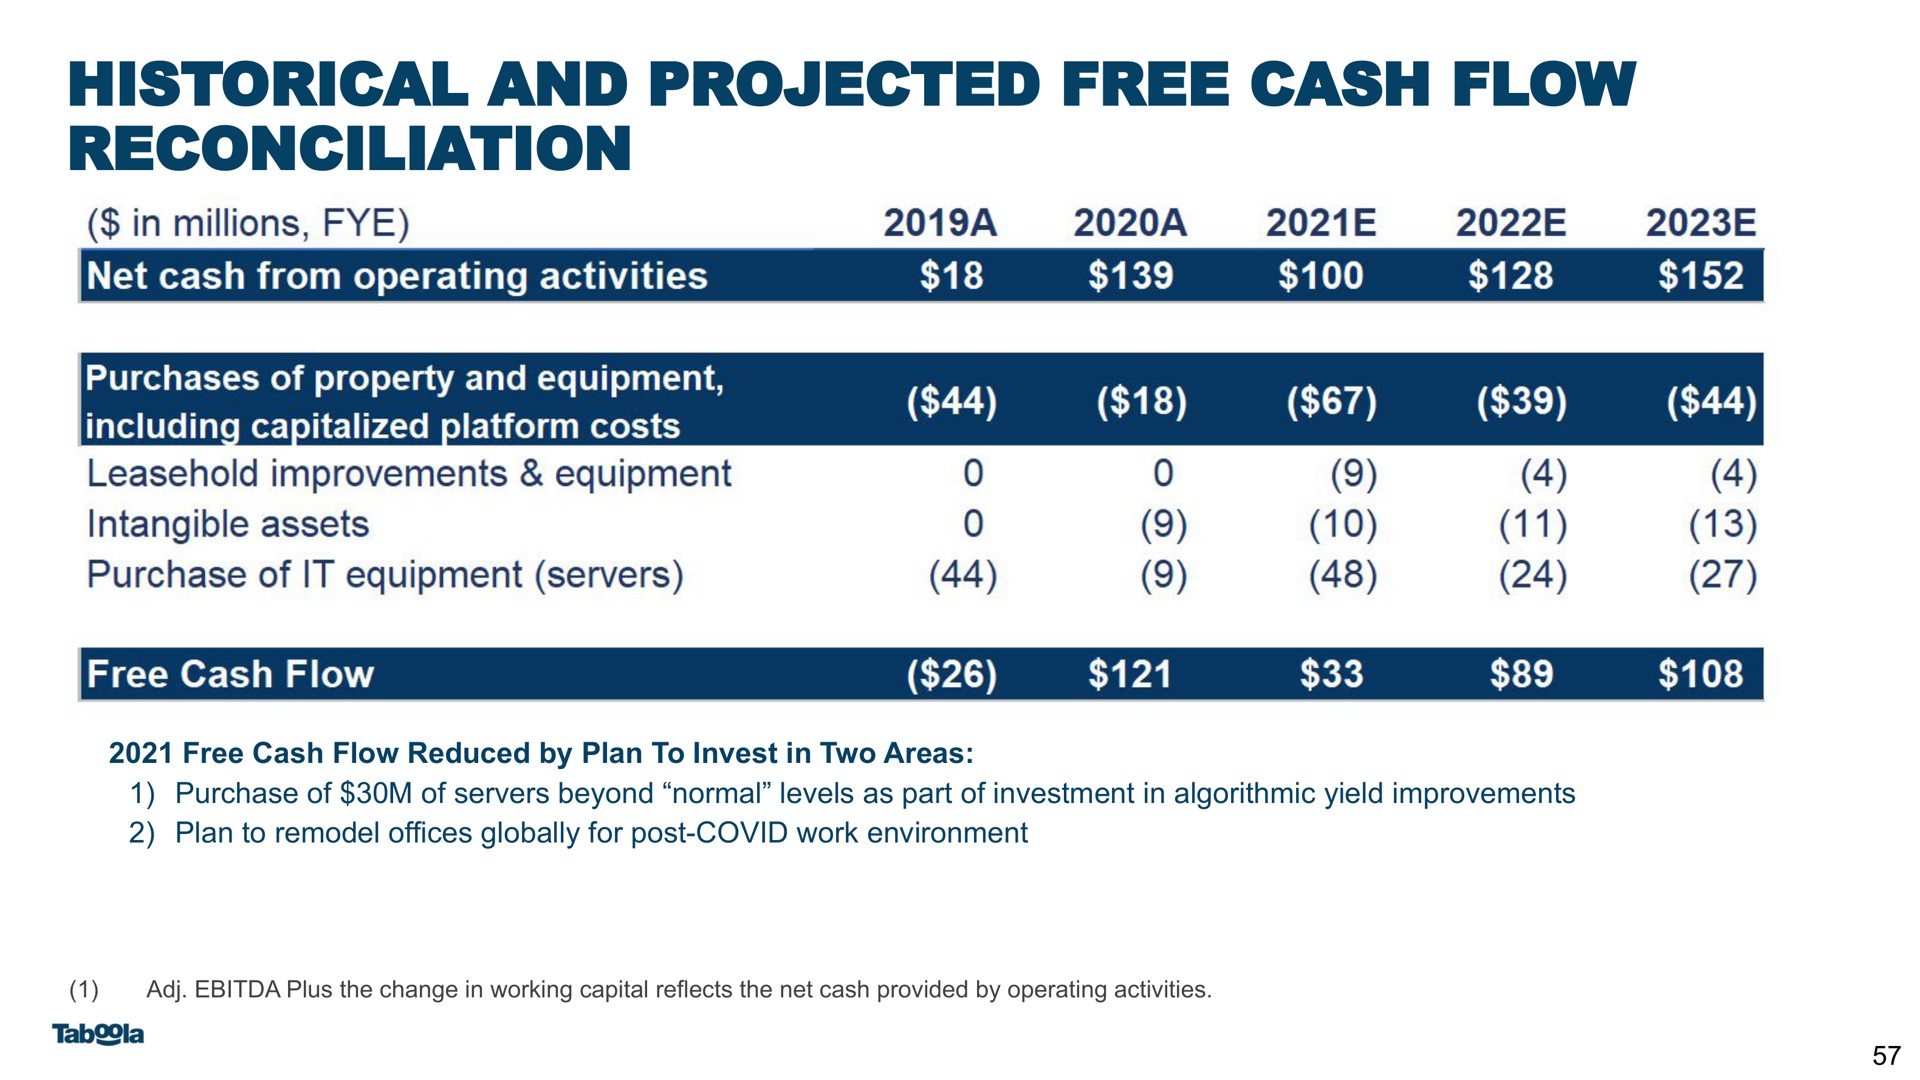 historical and projected free cash flow reconciliation | Taboola